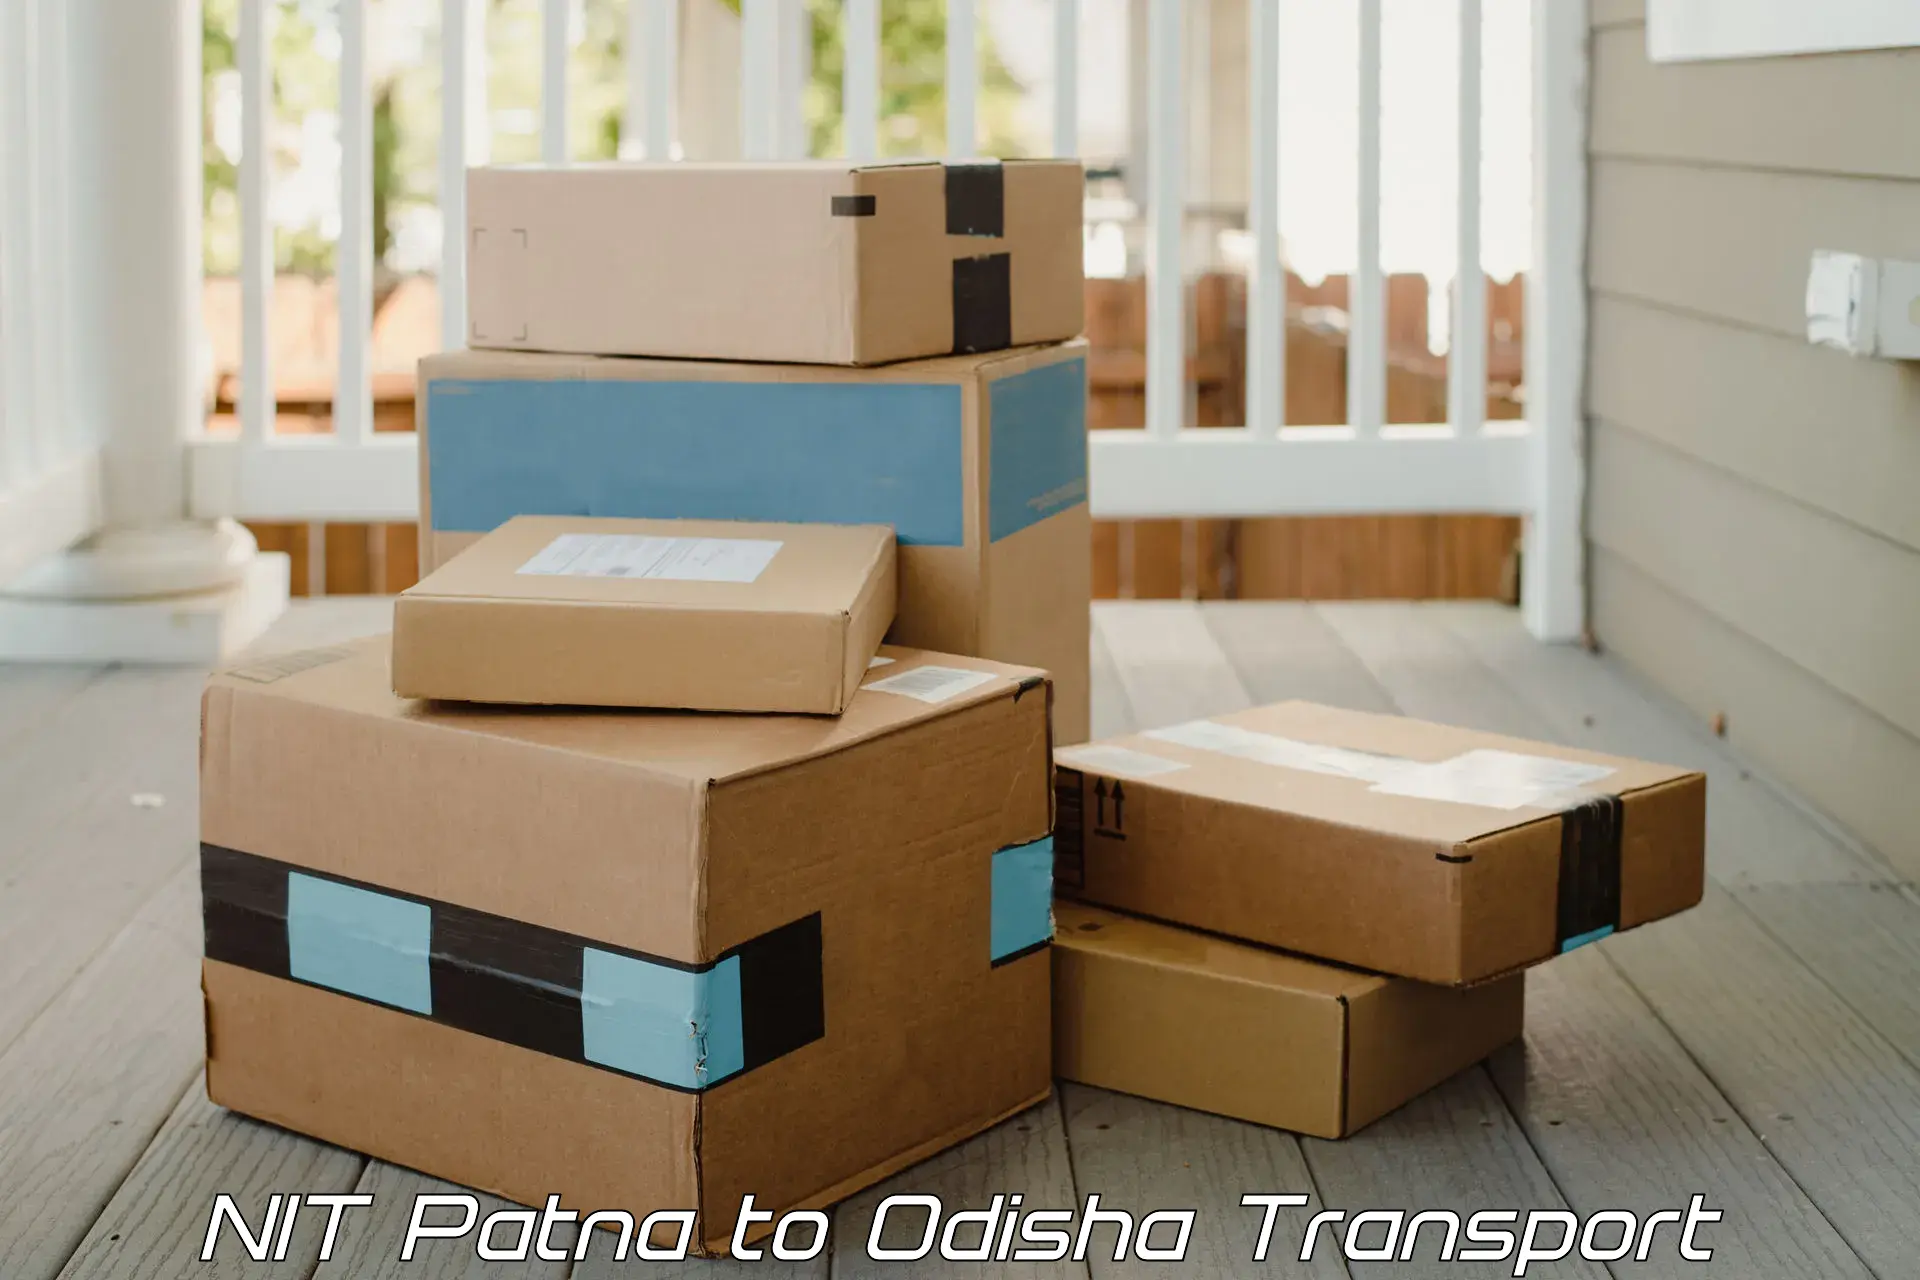 Container transportation services NIT Patna to Birmitrapur